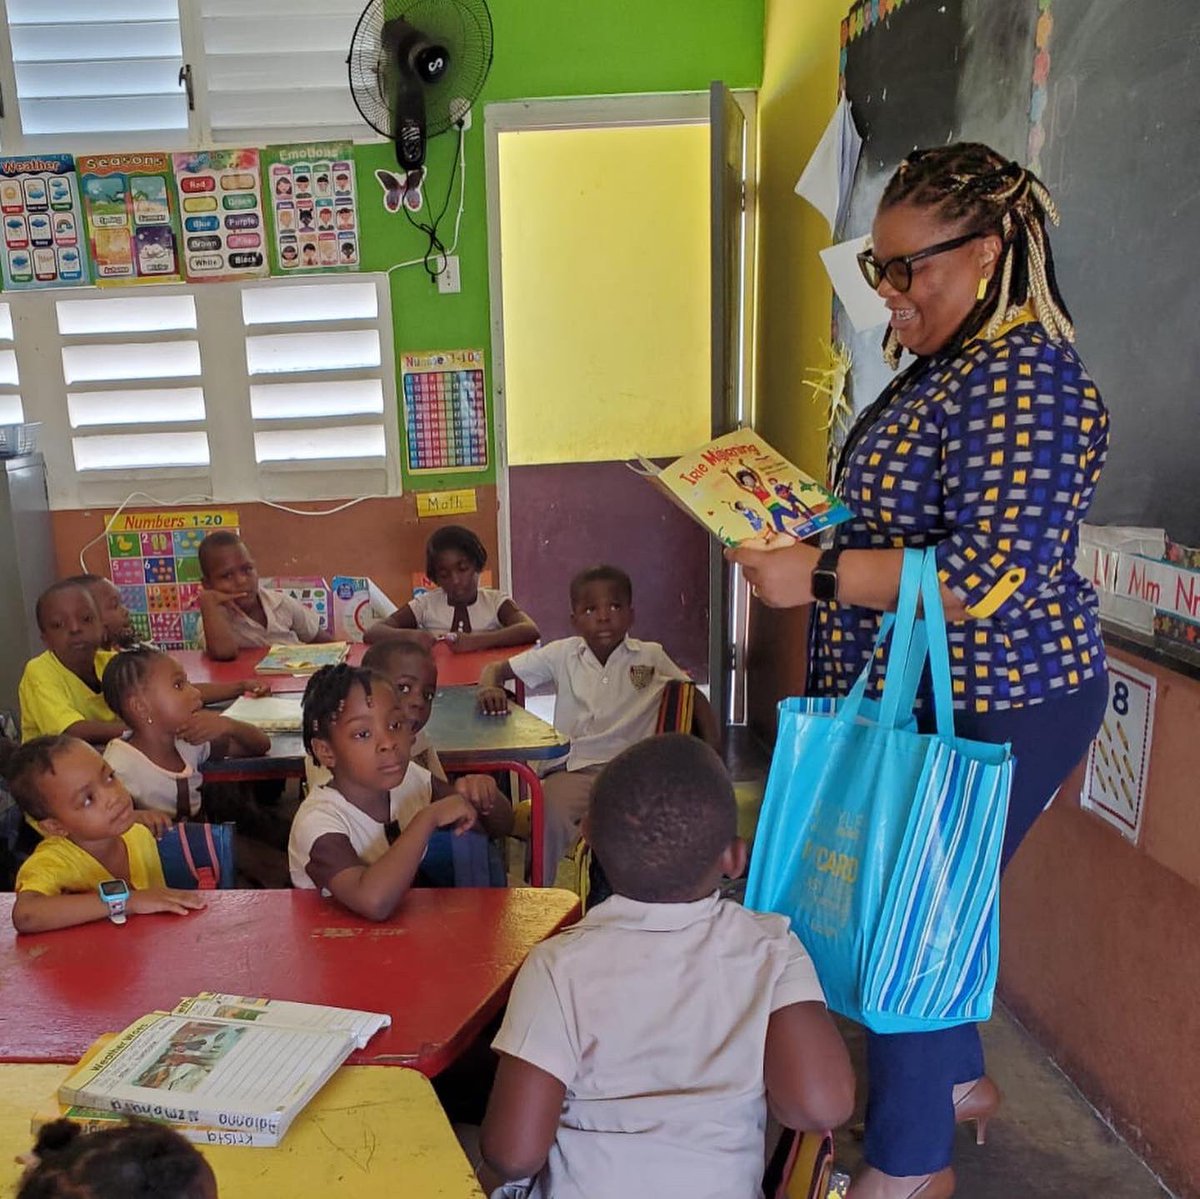 Teteena Williams, from NCB Old Harbour, brought smiles and stories to the little learners at Blackwood Gardens Basic School for Read Across Jamaica Day. 🌟 .. #EmpoweringPeople #UnlockingDreams #BuildingCommunities #ReadAcrossJamaicaDay #LiteracyInitiative #NCBCommunityOutreach